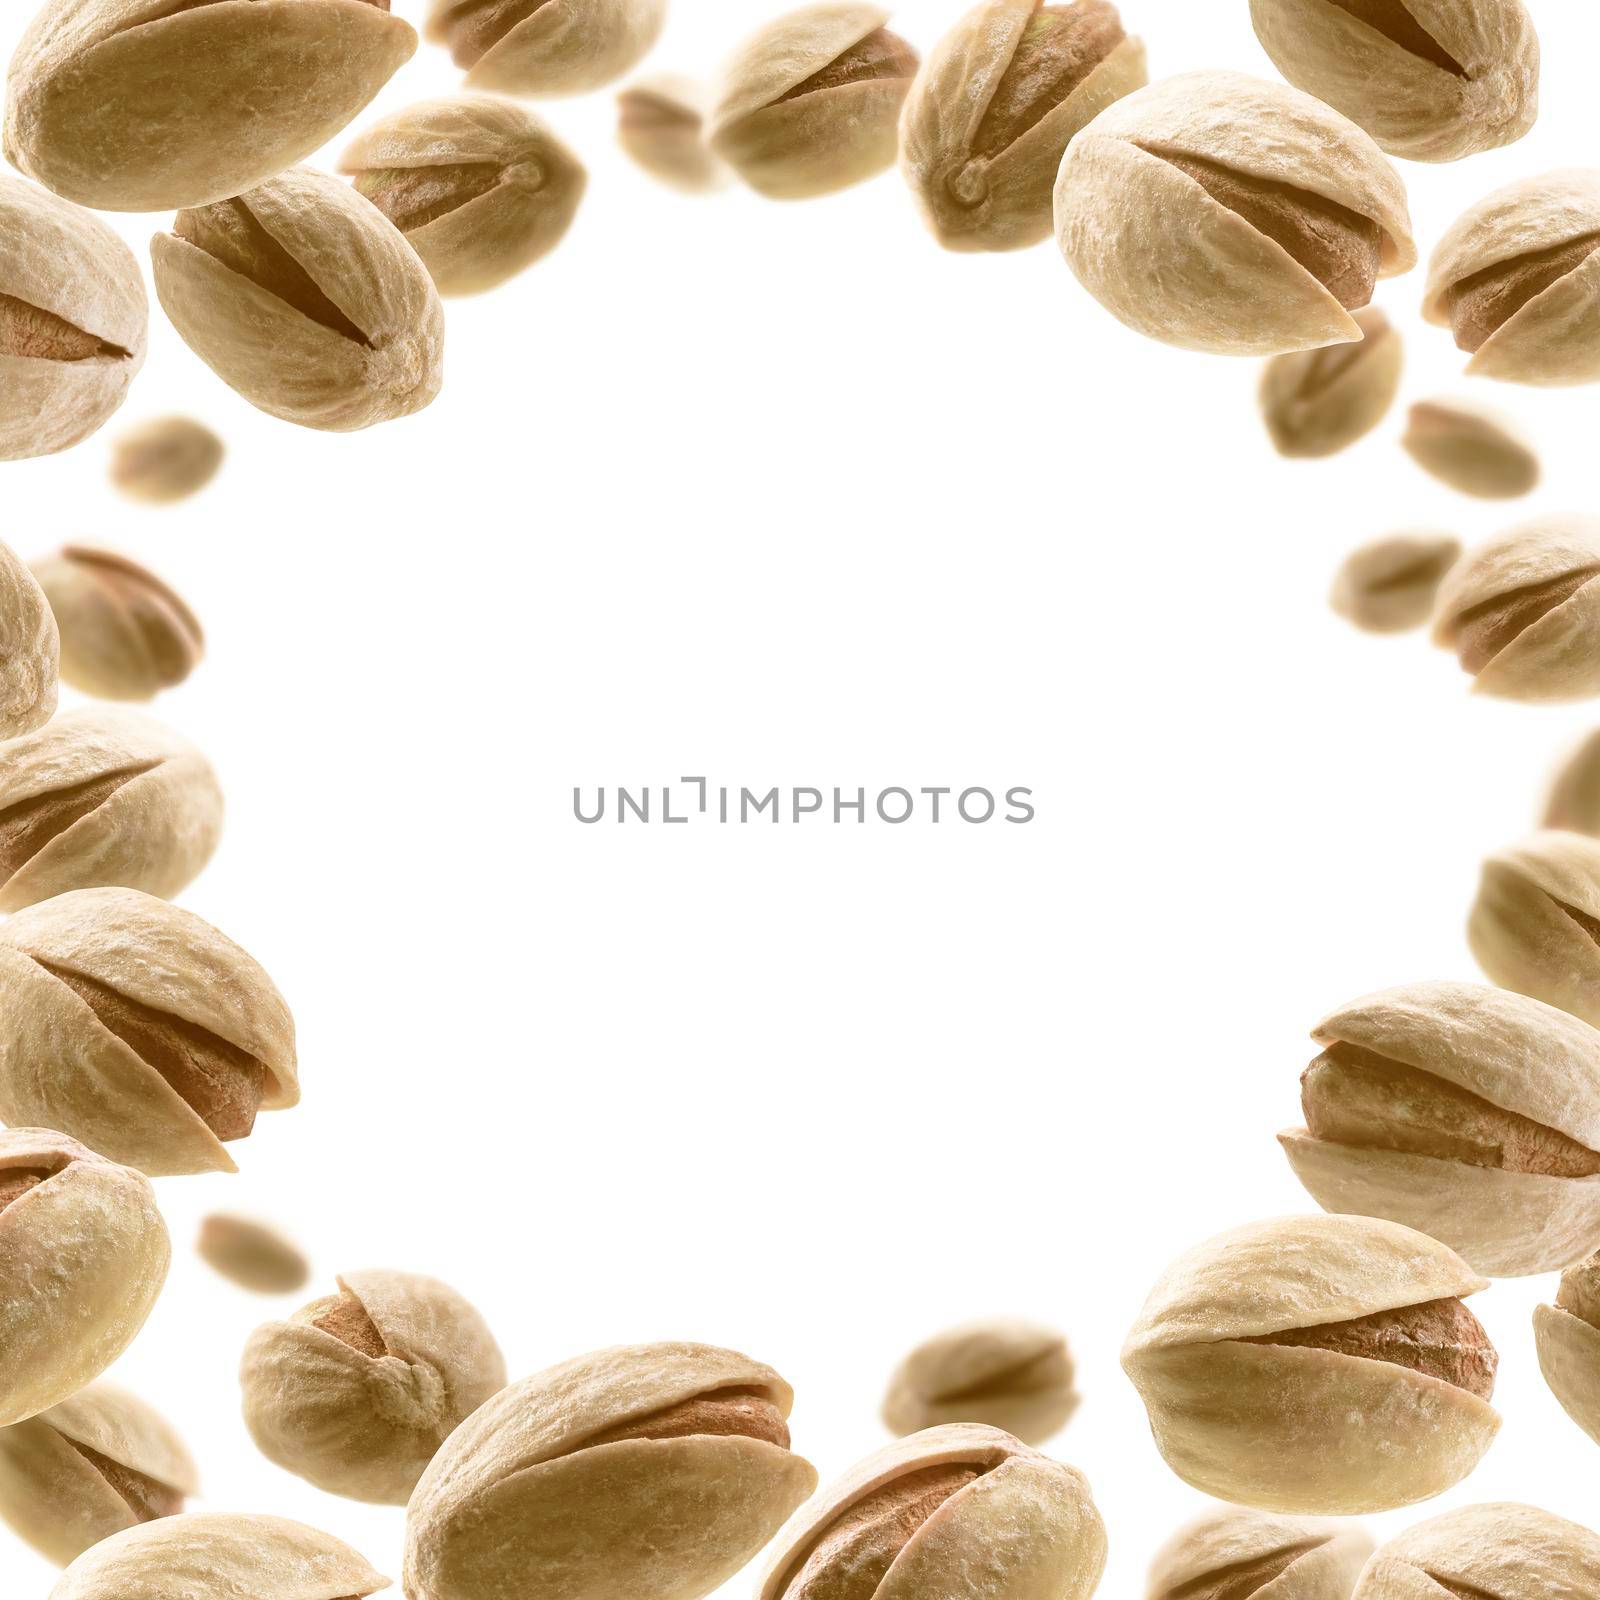 Salted pistachios levitate on a white background by butenkow